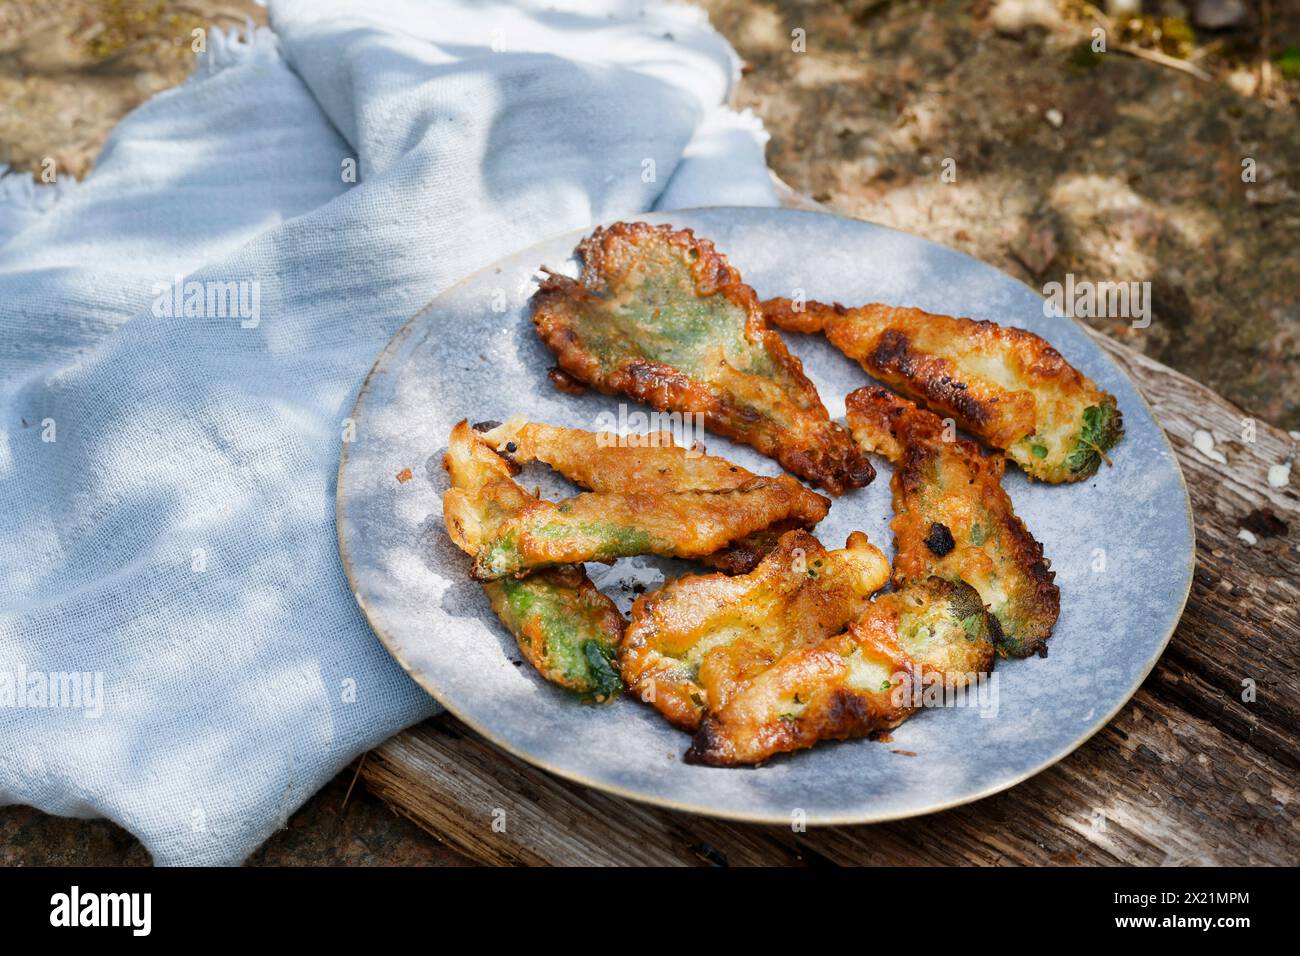 Making vegan plant-based potato chips with nettle leaves, step 5: Finished pastry sheets are arranged on a plate, series image 5/5 Stock Photo